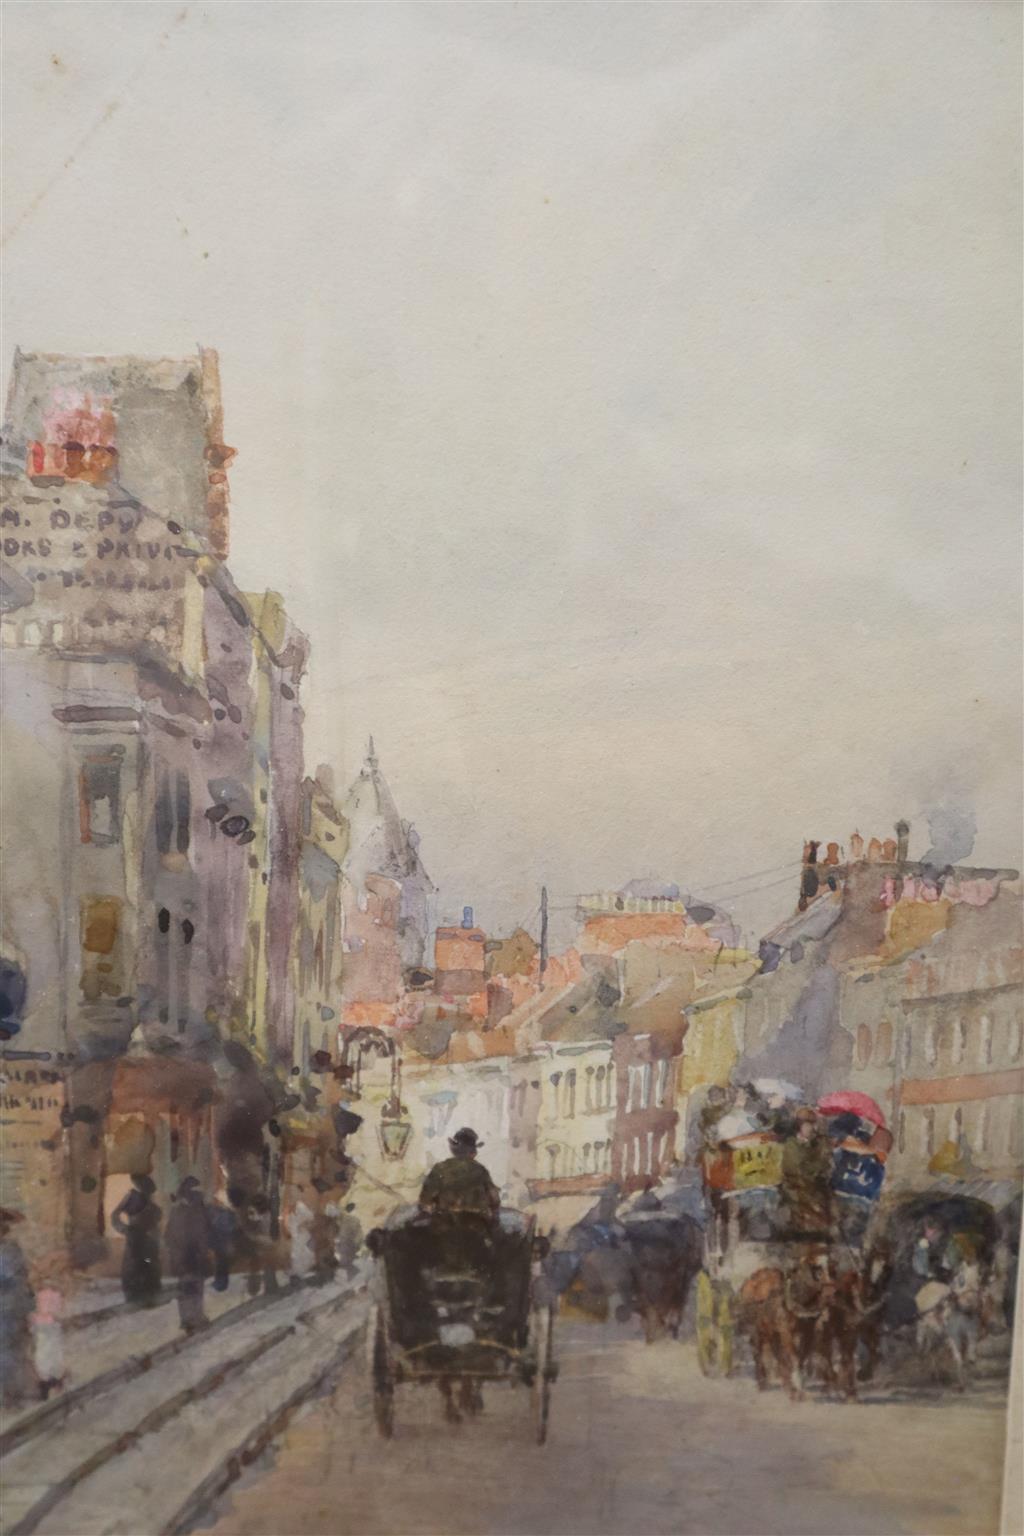 Rose Barton, watercolour, Street scene with horse drawn carriages, signed, 24 x 16cm.